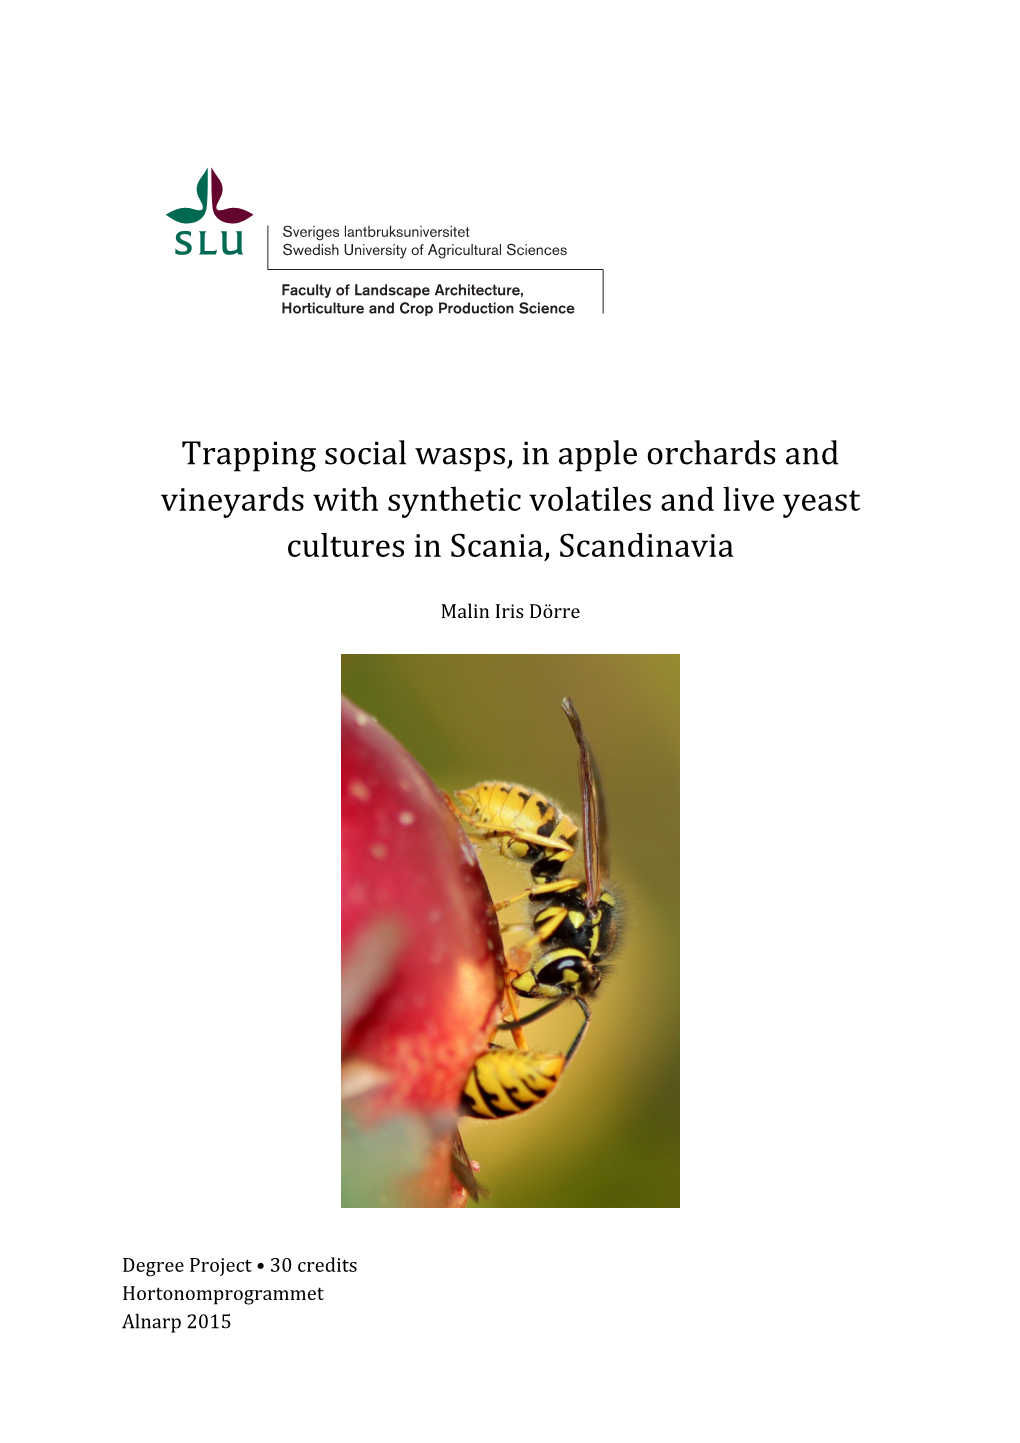 Trapping Social Wasps, in Apple Orchards and Vineyards with Synthetic Volatiles and Live Yeast Cultures in Scania, Scandinavia